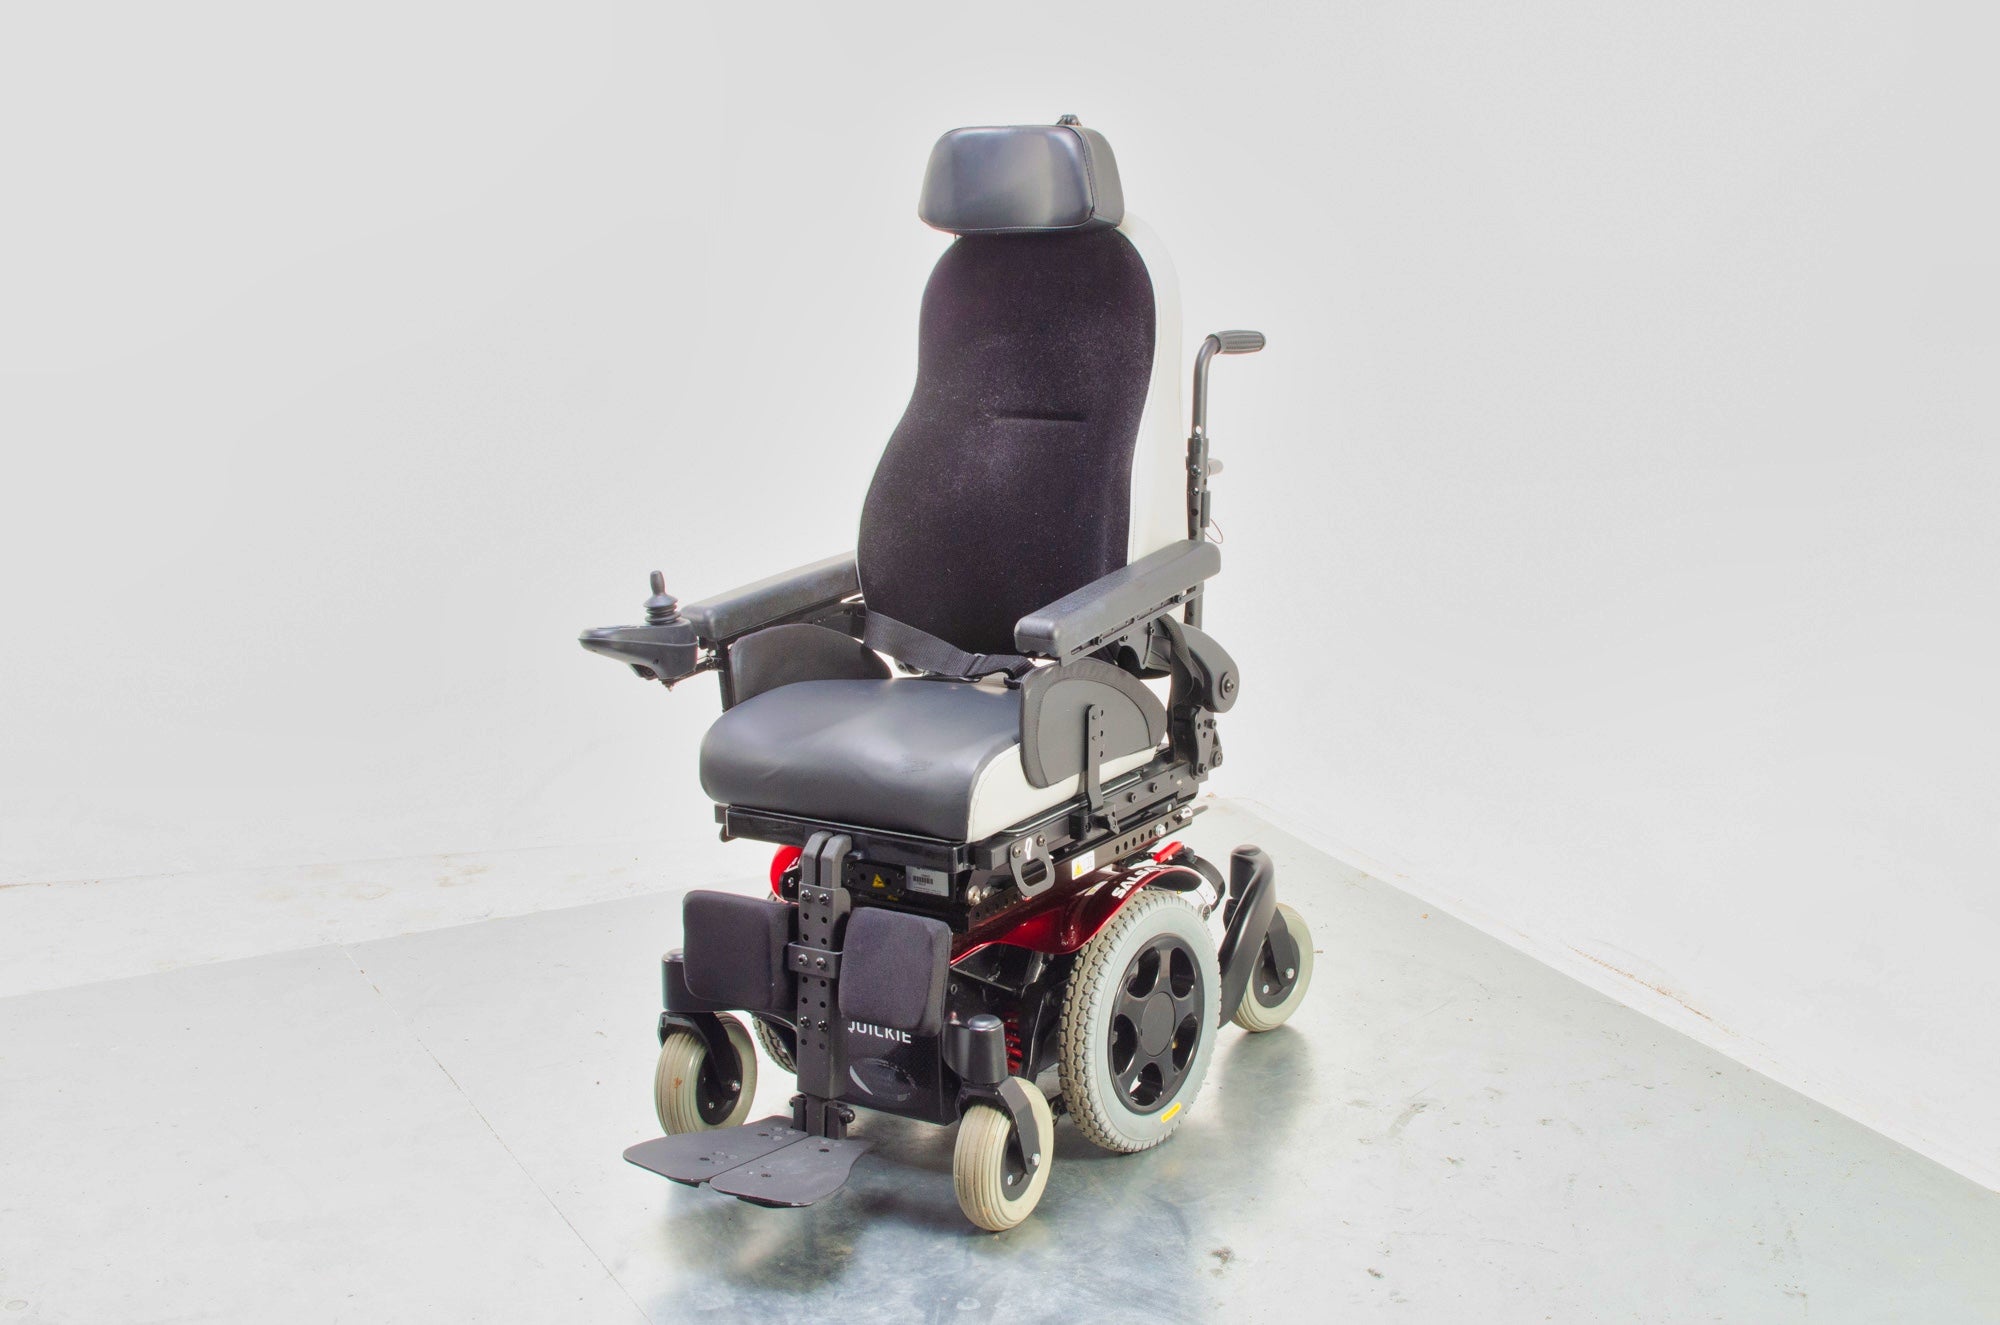 Quickie Salsa M2 6mph Used Electric Wheelchair Powerchair Power Tilt Sunrise Medical Outdoor MWD